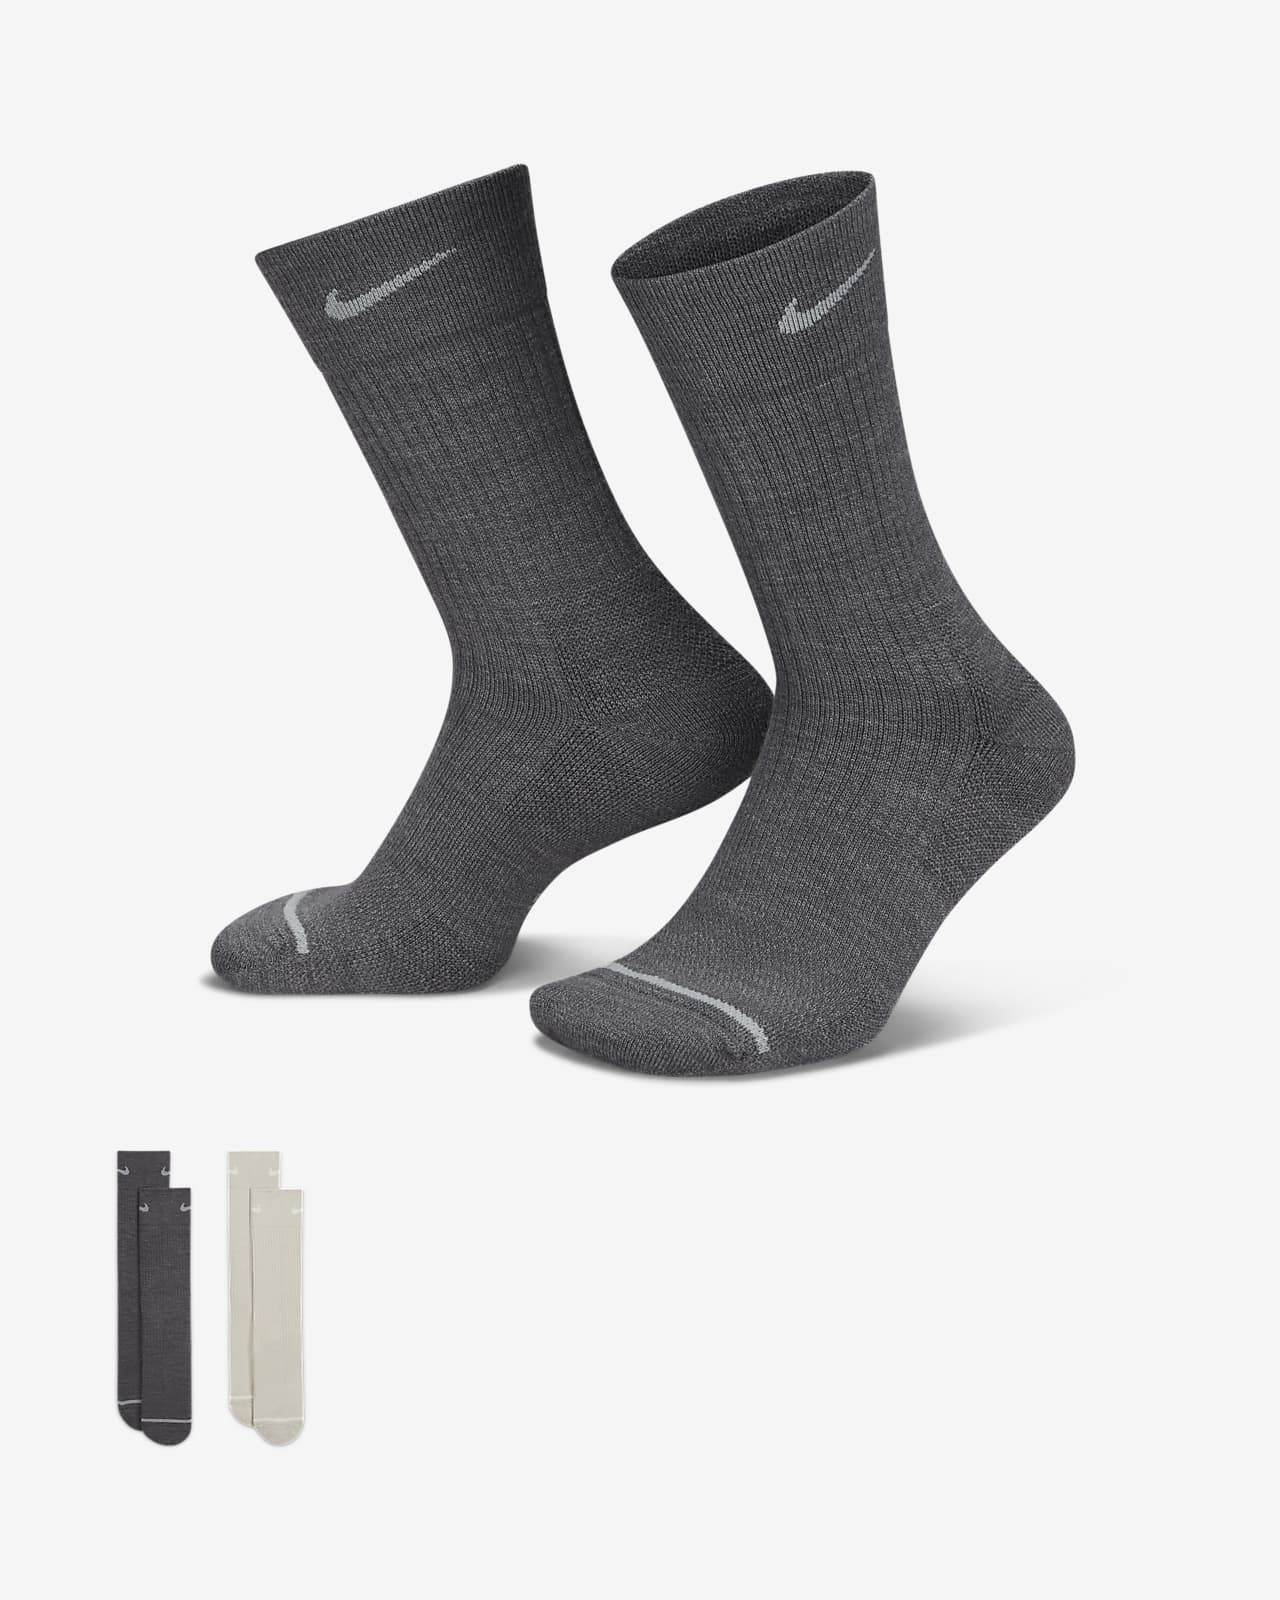 Nike Everyday Wool Calcetines largos acolchados (2 pares)